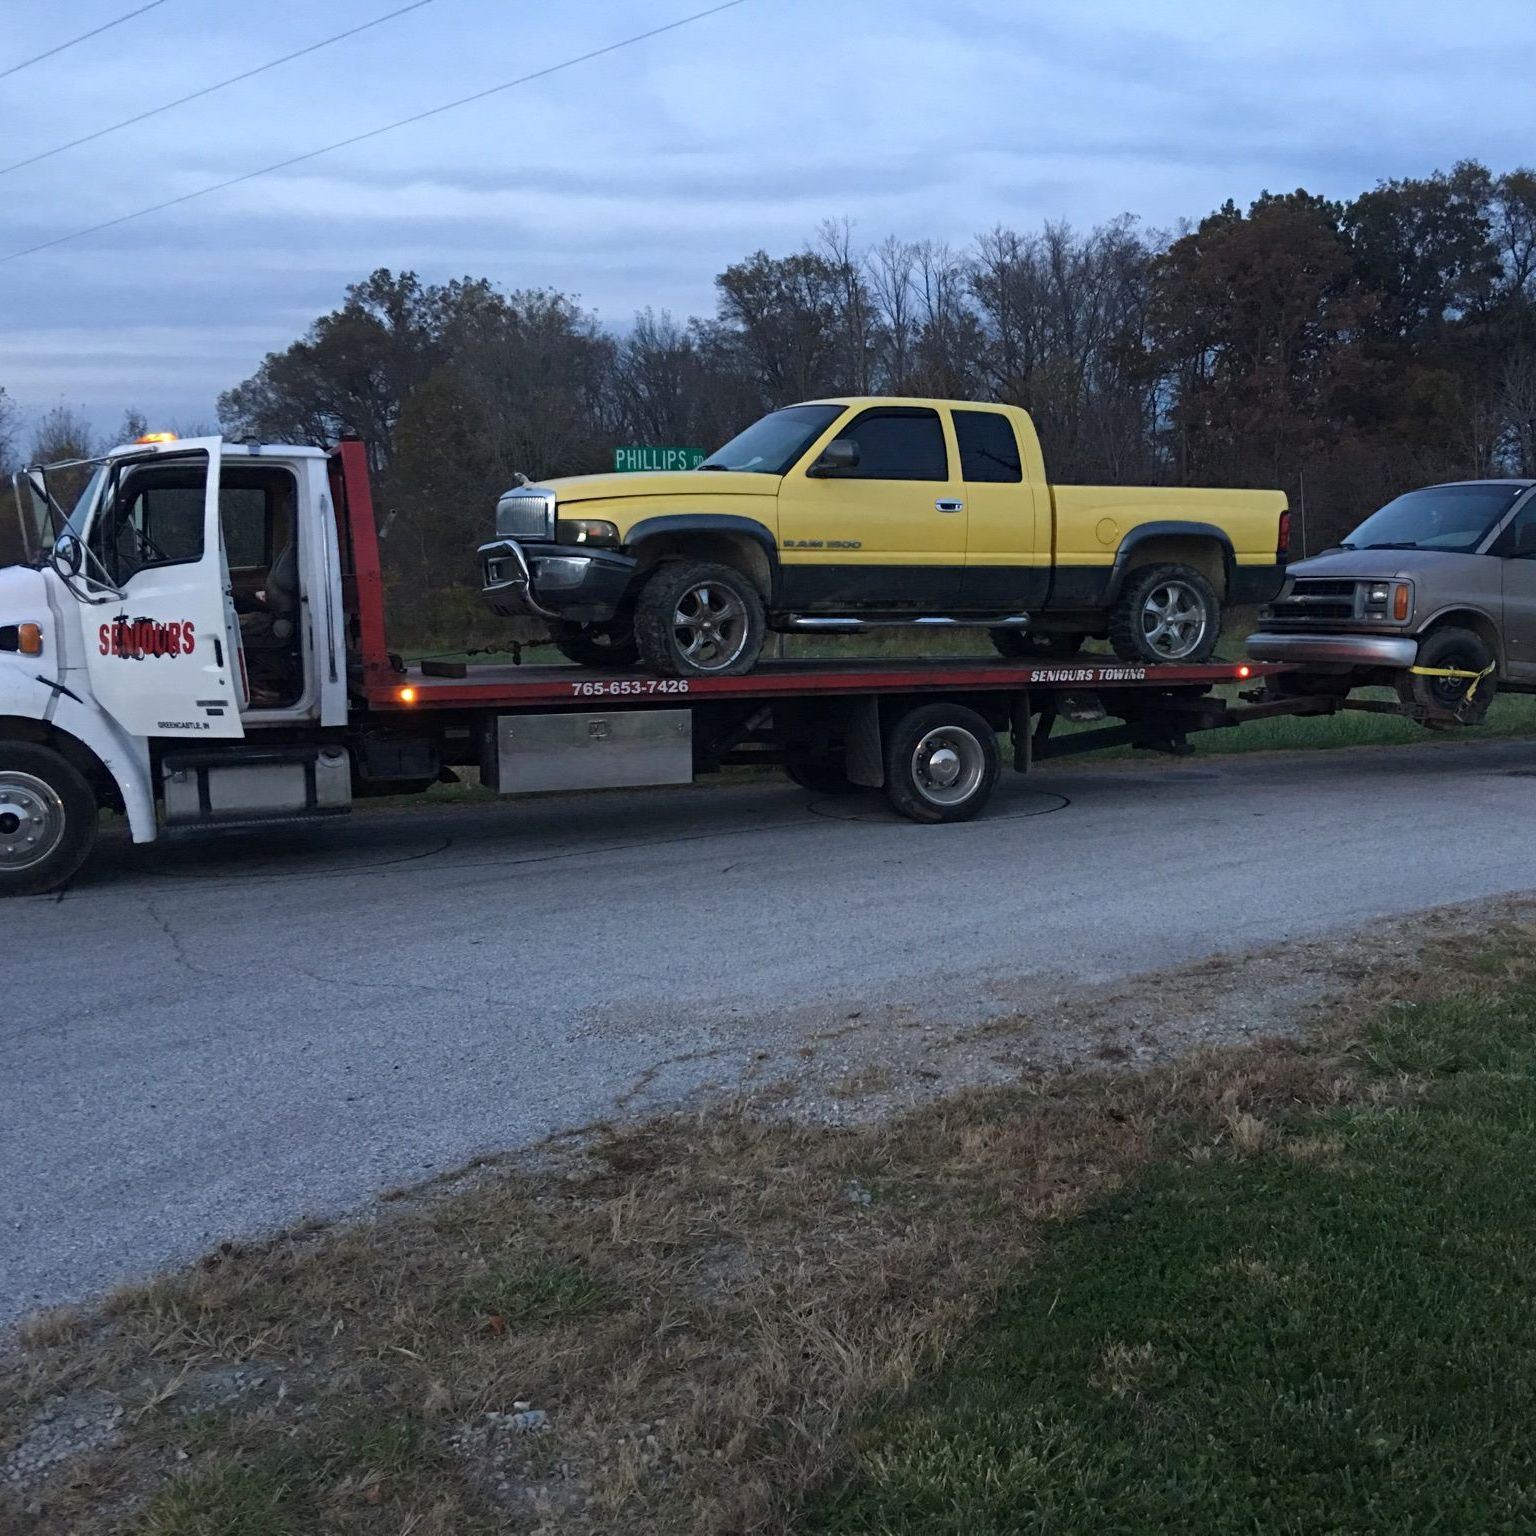 Accident Towning in Greencastle, Indiana